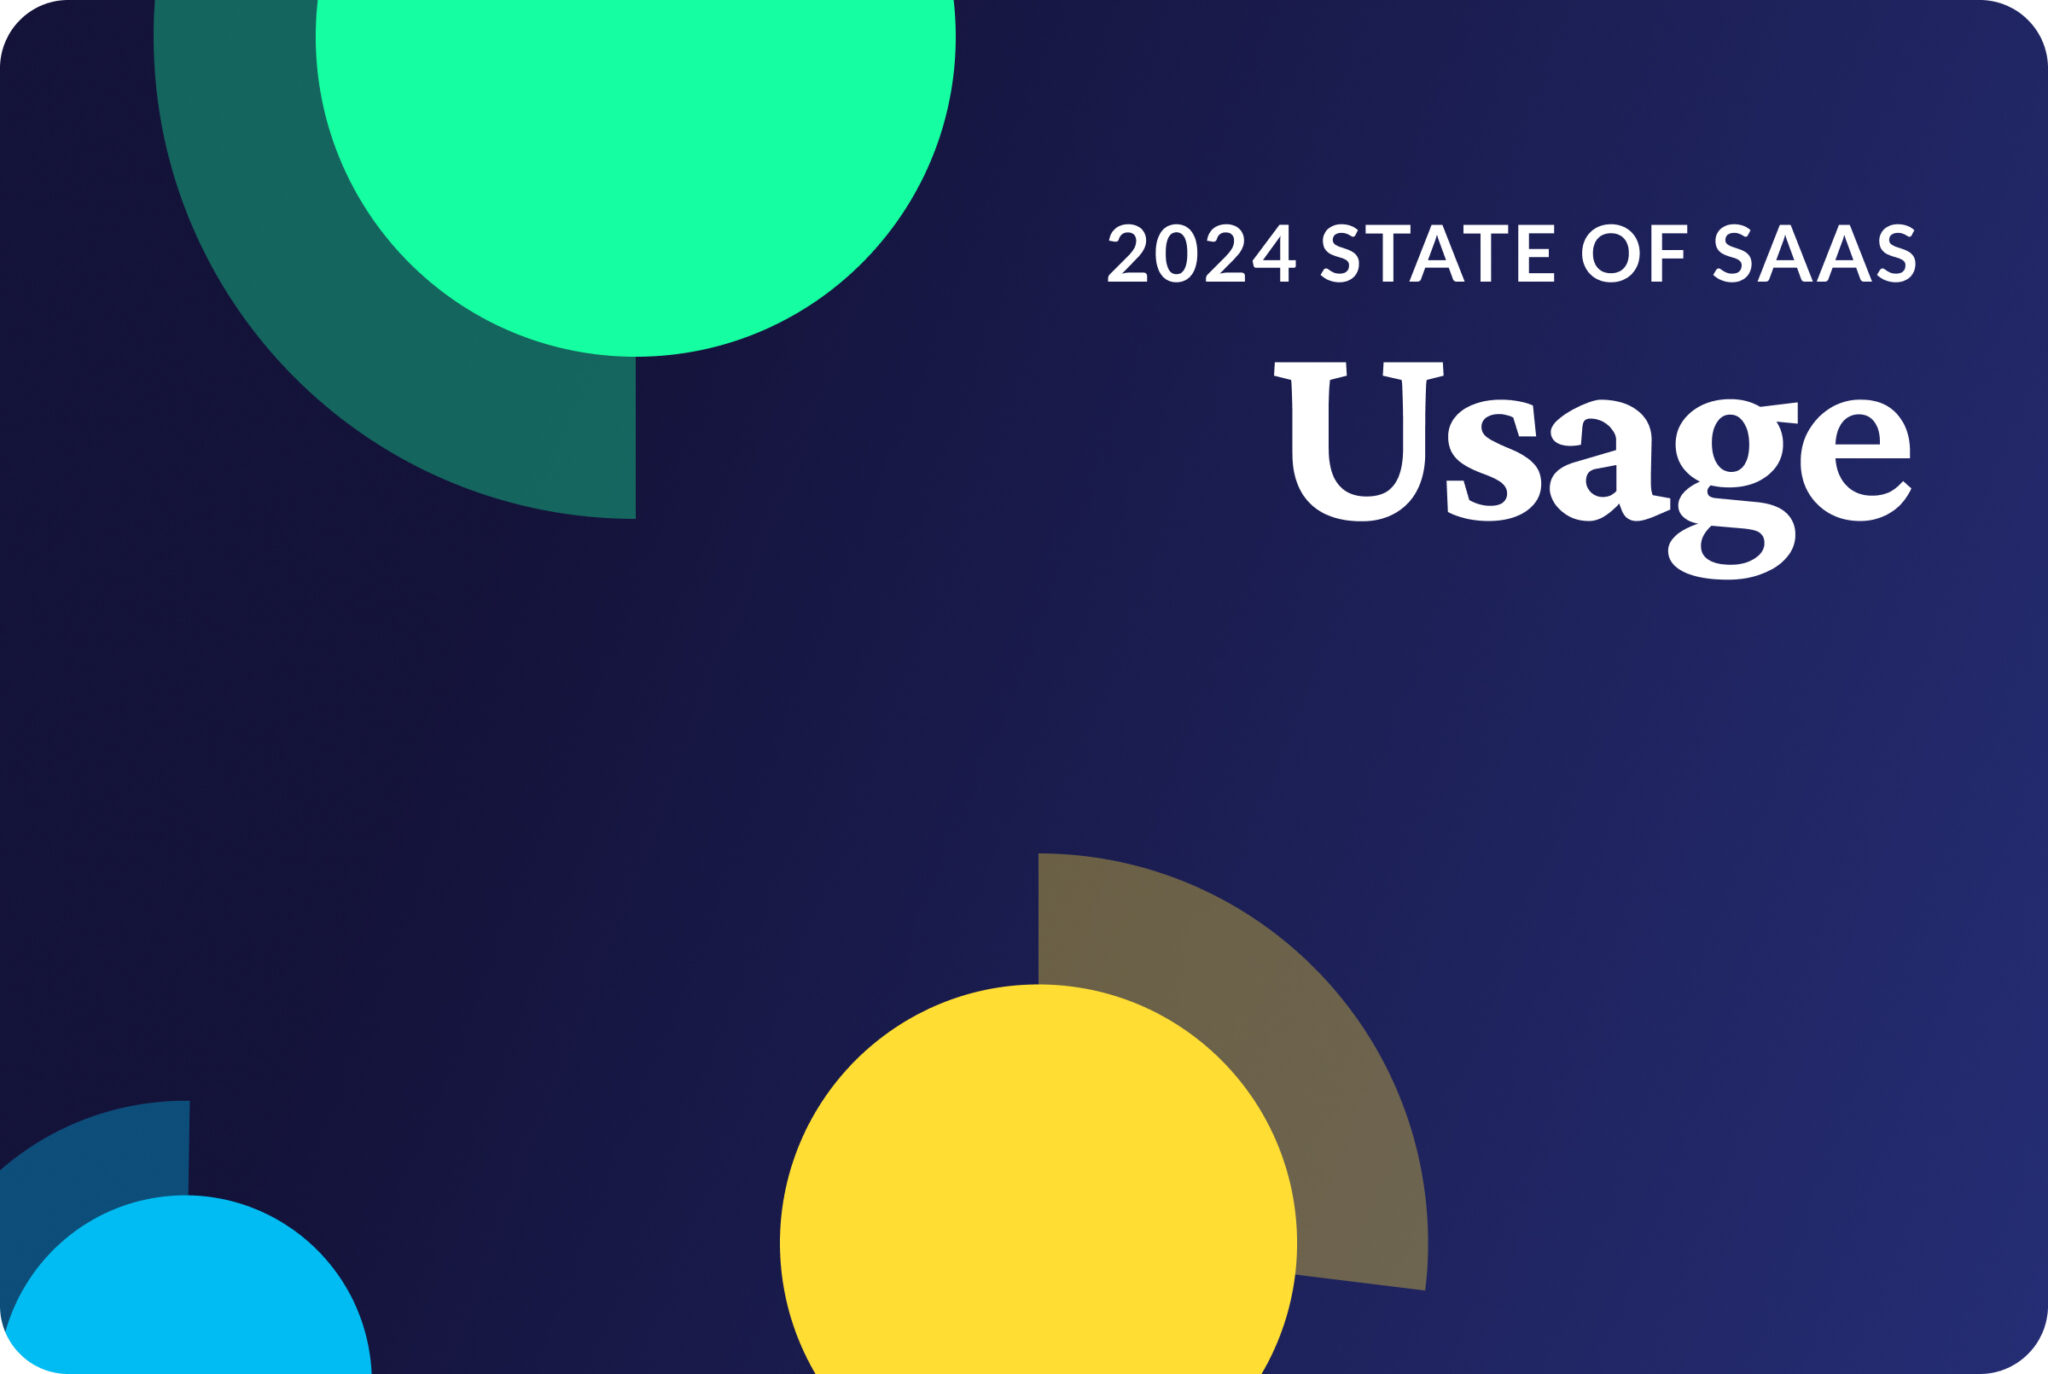 Image reads: 2024 state of saas usage